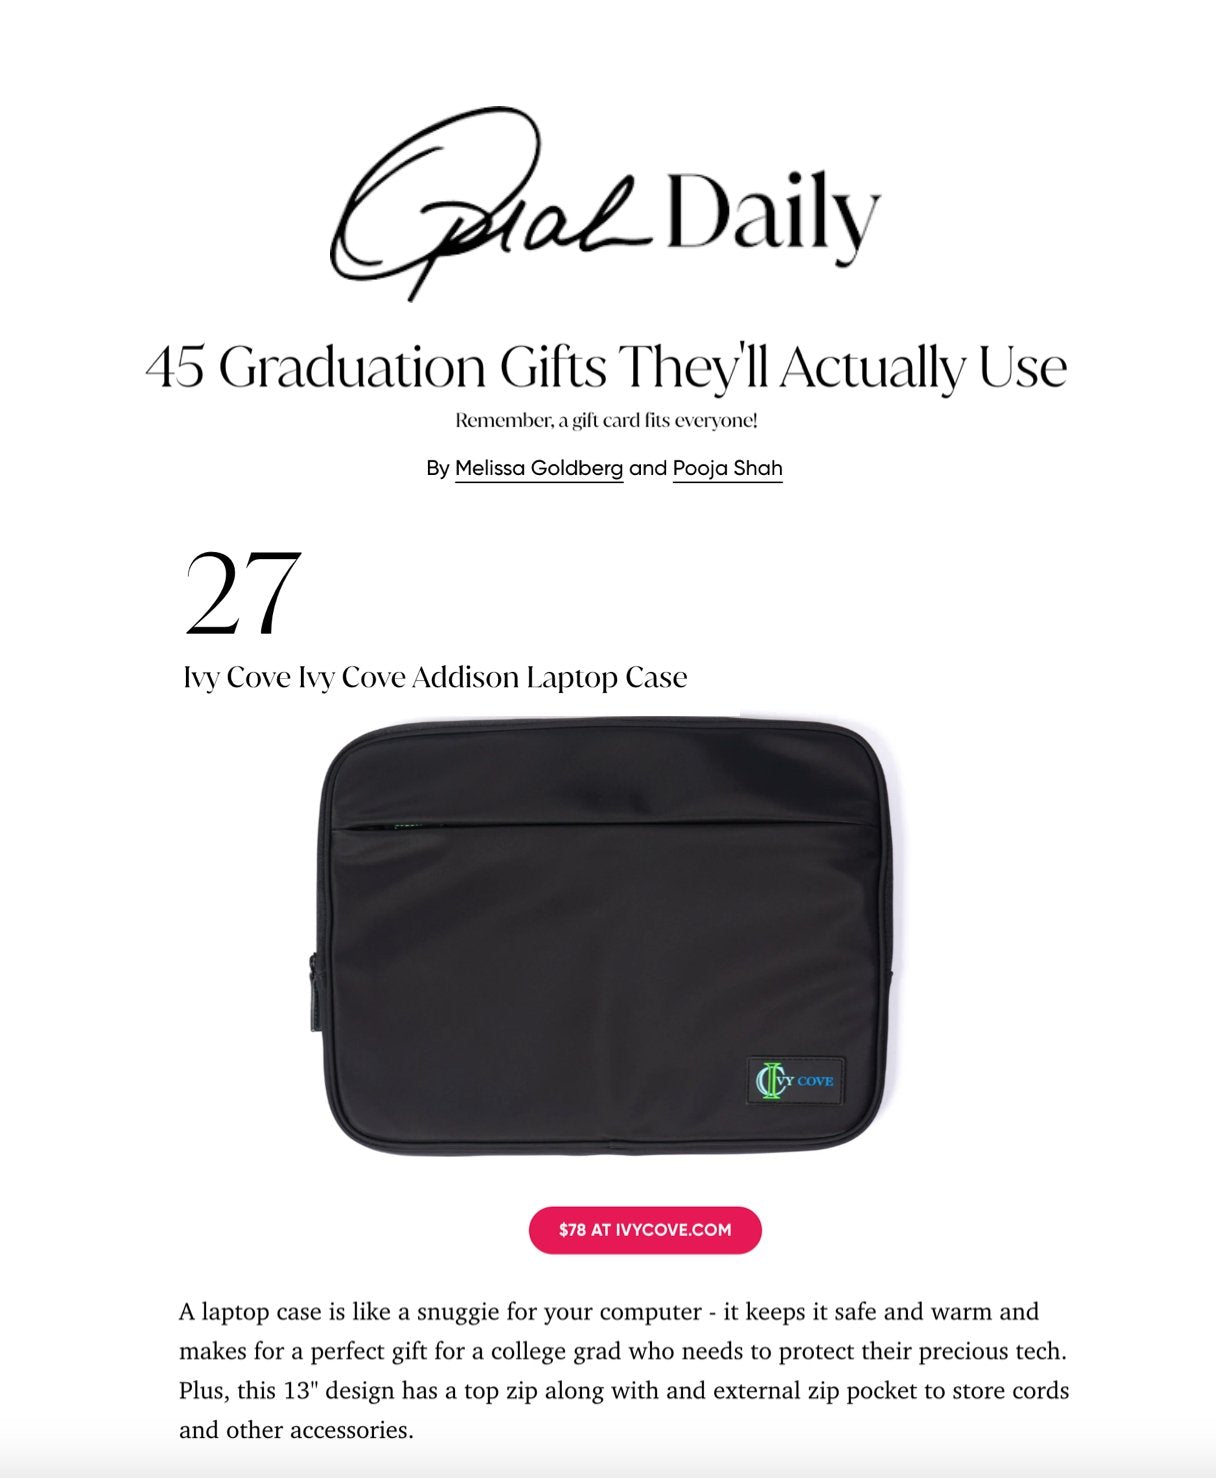 Gifts For Grads on Oprah Daily - Ivy Cove Montecito